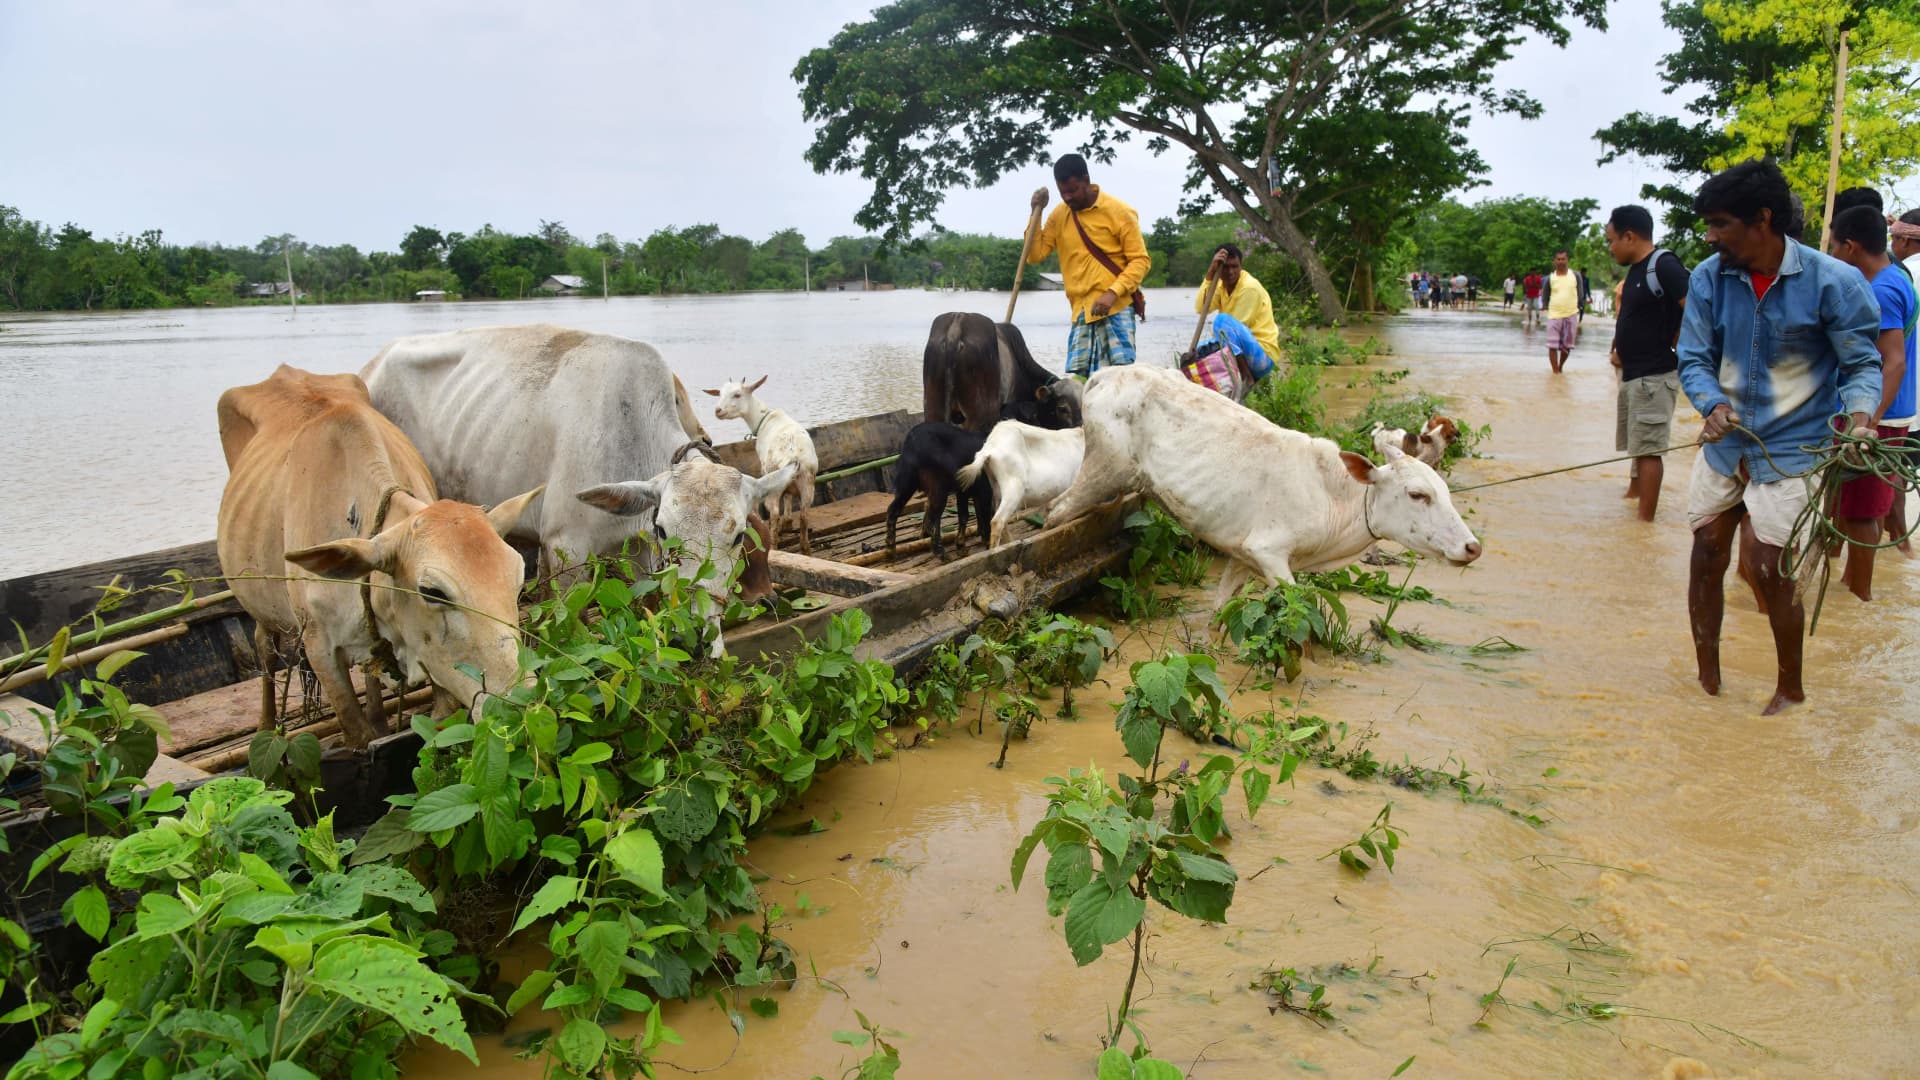 Villagers lead their cattle to a partially flooded road after travelling on a boat through flood waters following heavy rains in Nagaon district, Assam state, India, on May 19, 2022.